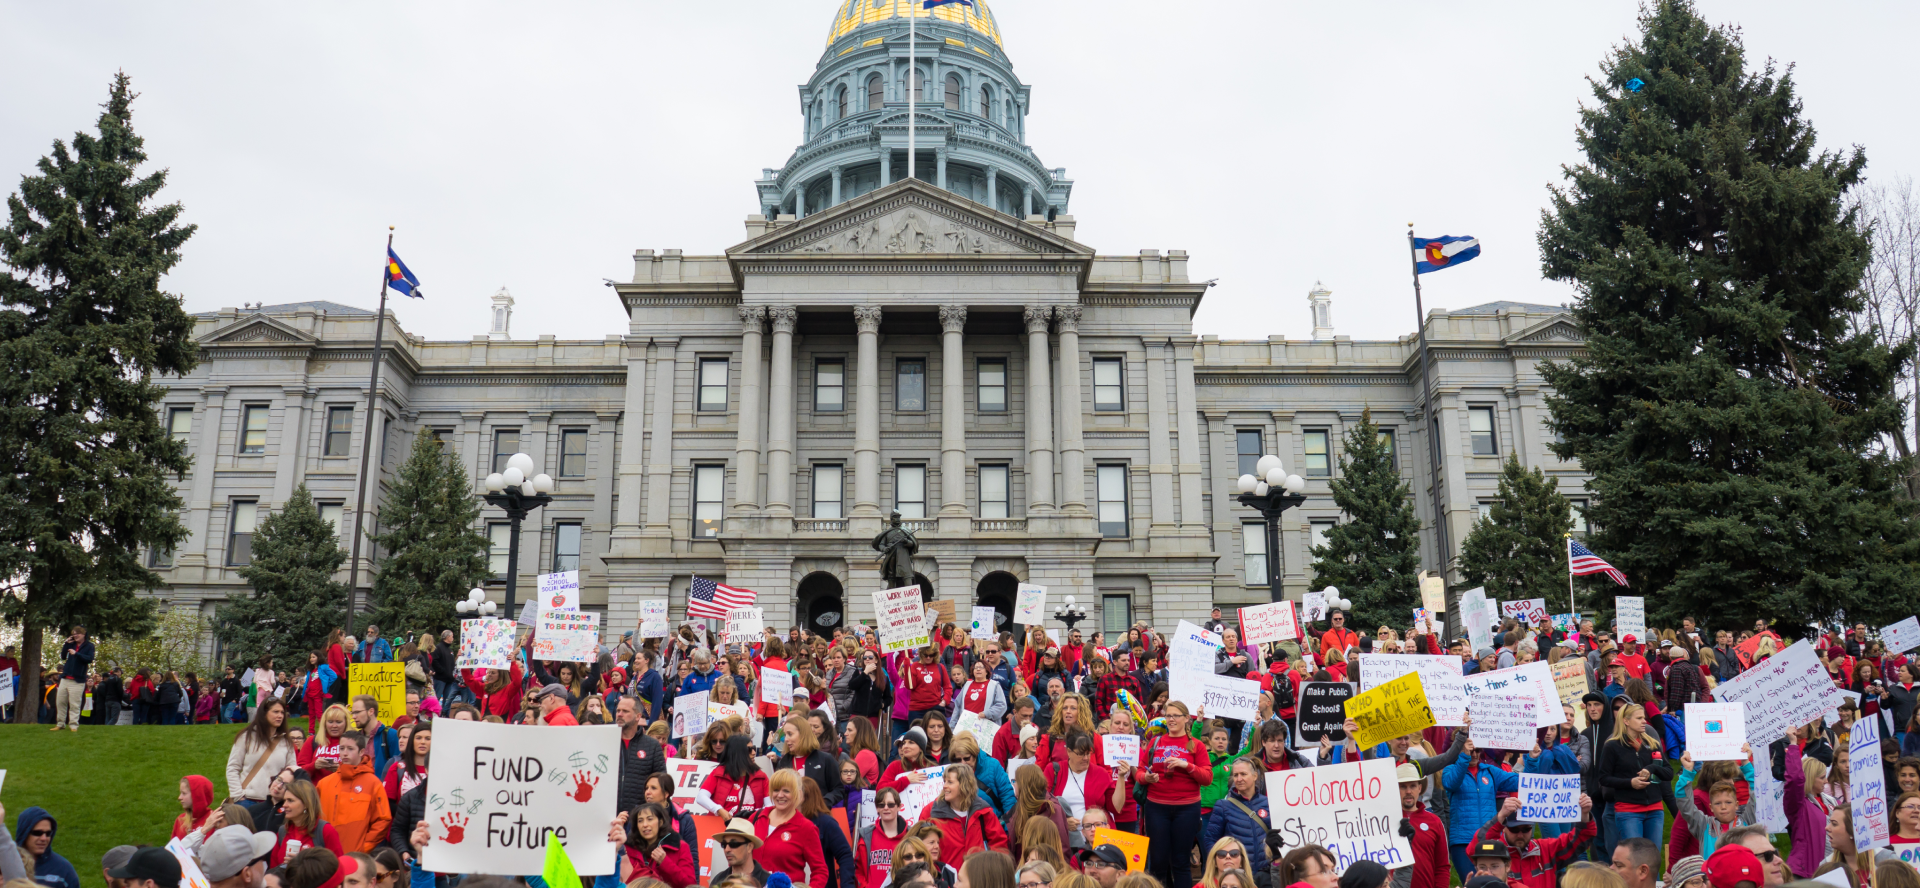 Colorado Education Association members rally in front of the Colorado state capitol building wearing red and carrying signs and banners